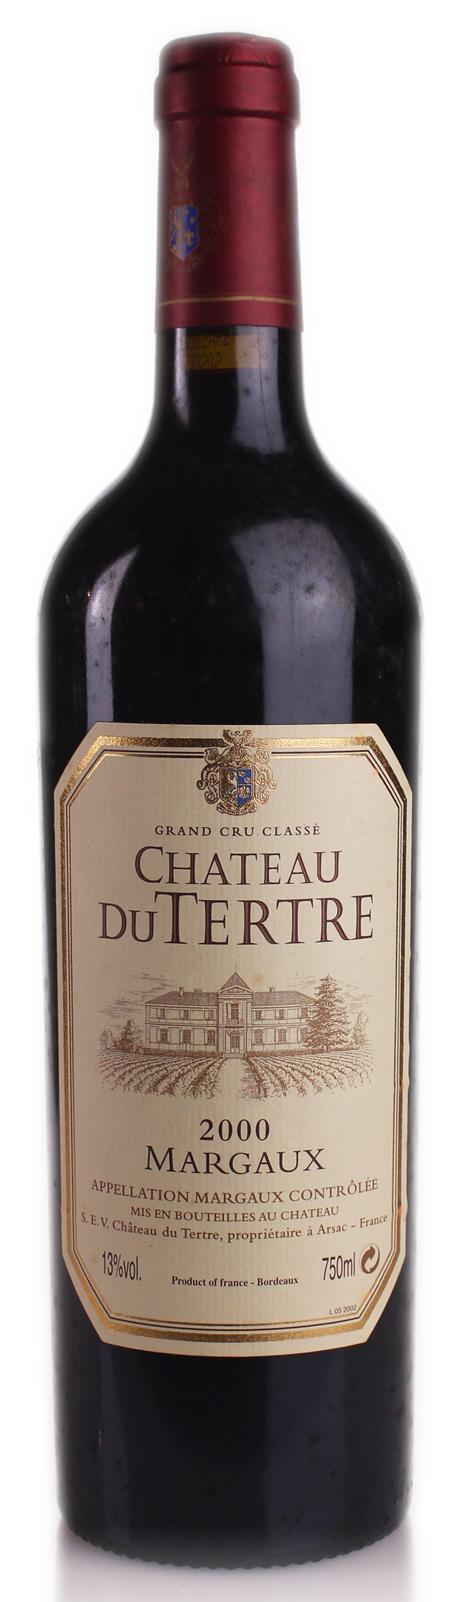 Chateau Du Tertre 2000 Margaux. Fifth Growth. Perfect fill level (HF). Good label. 1 bottle (